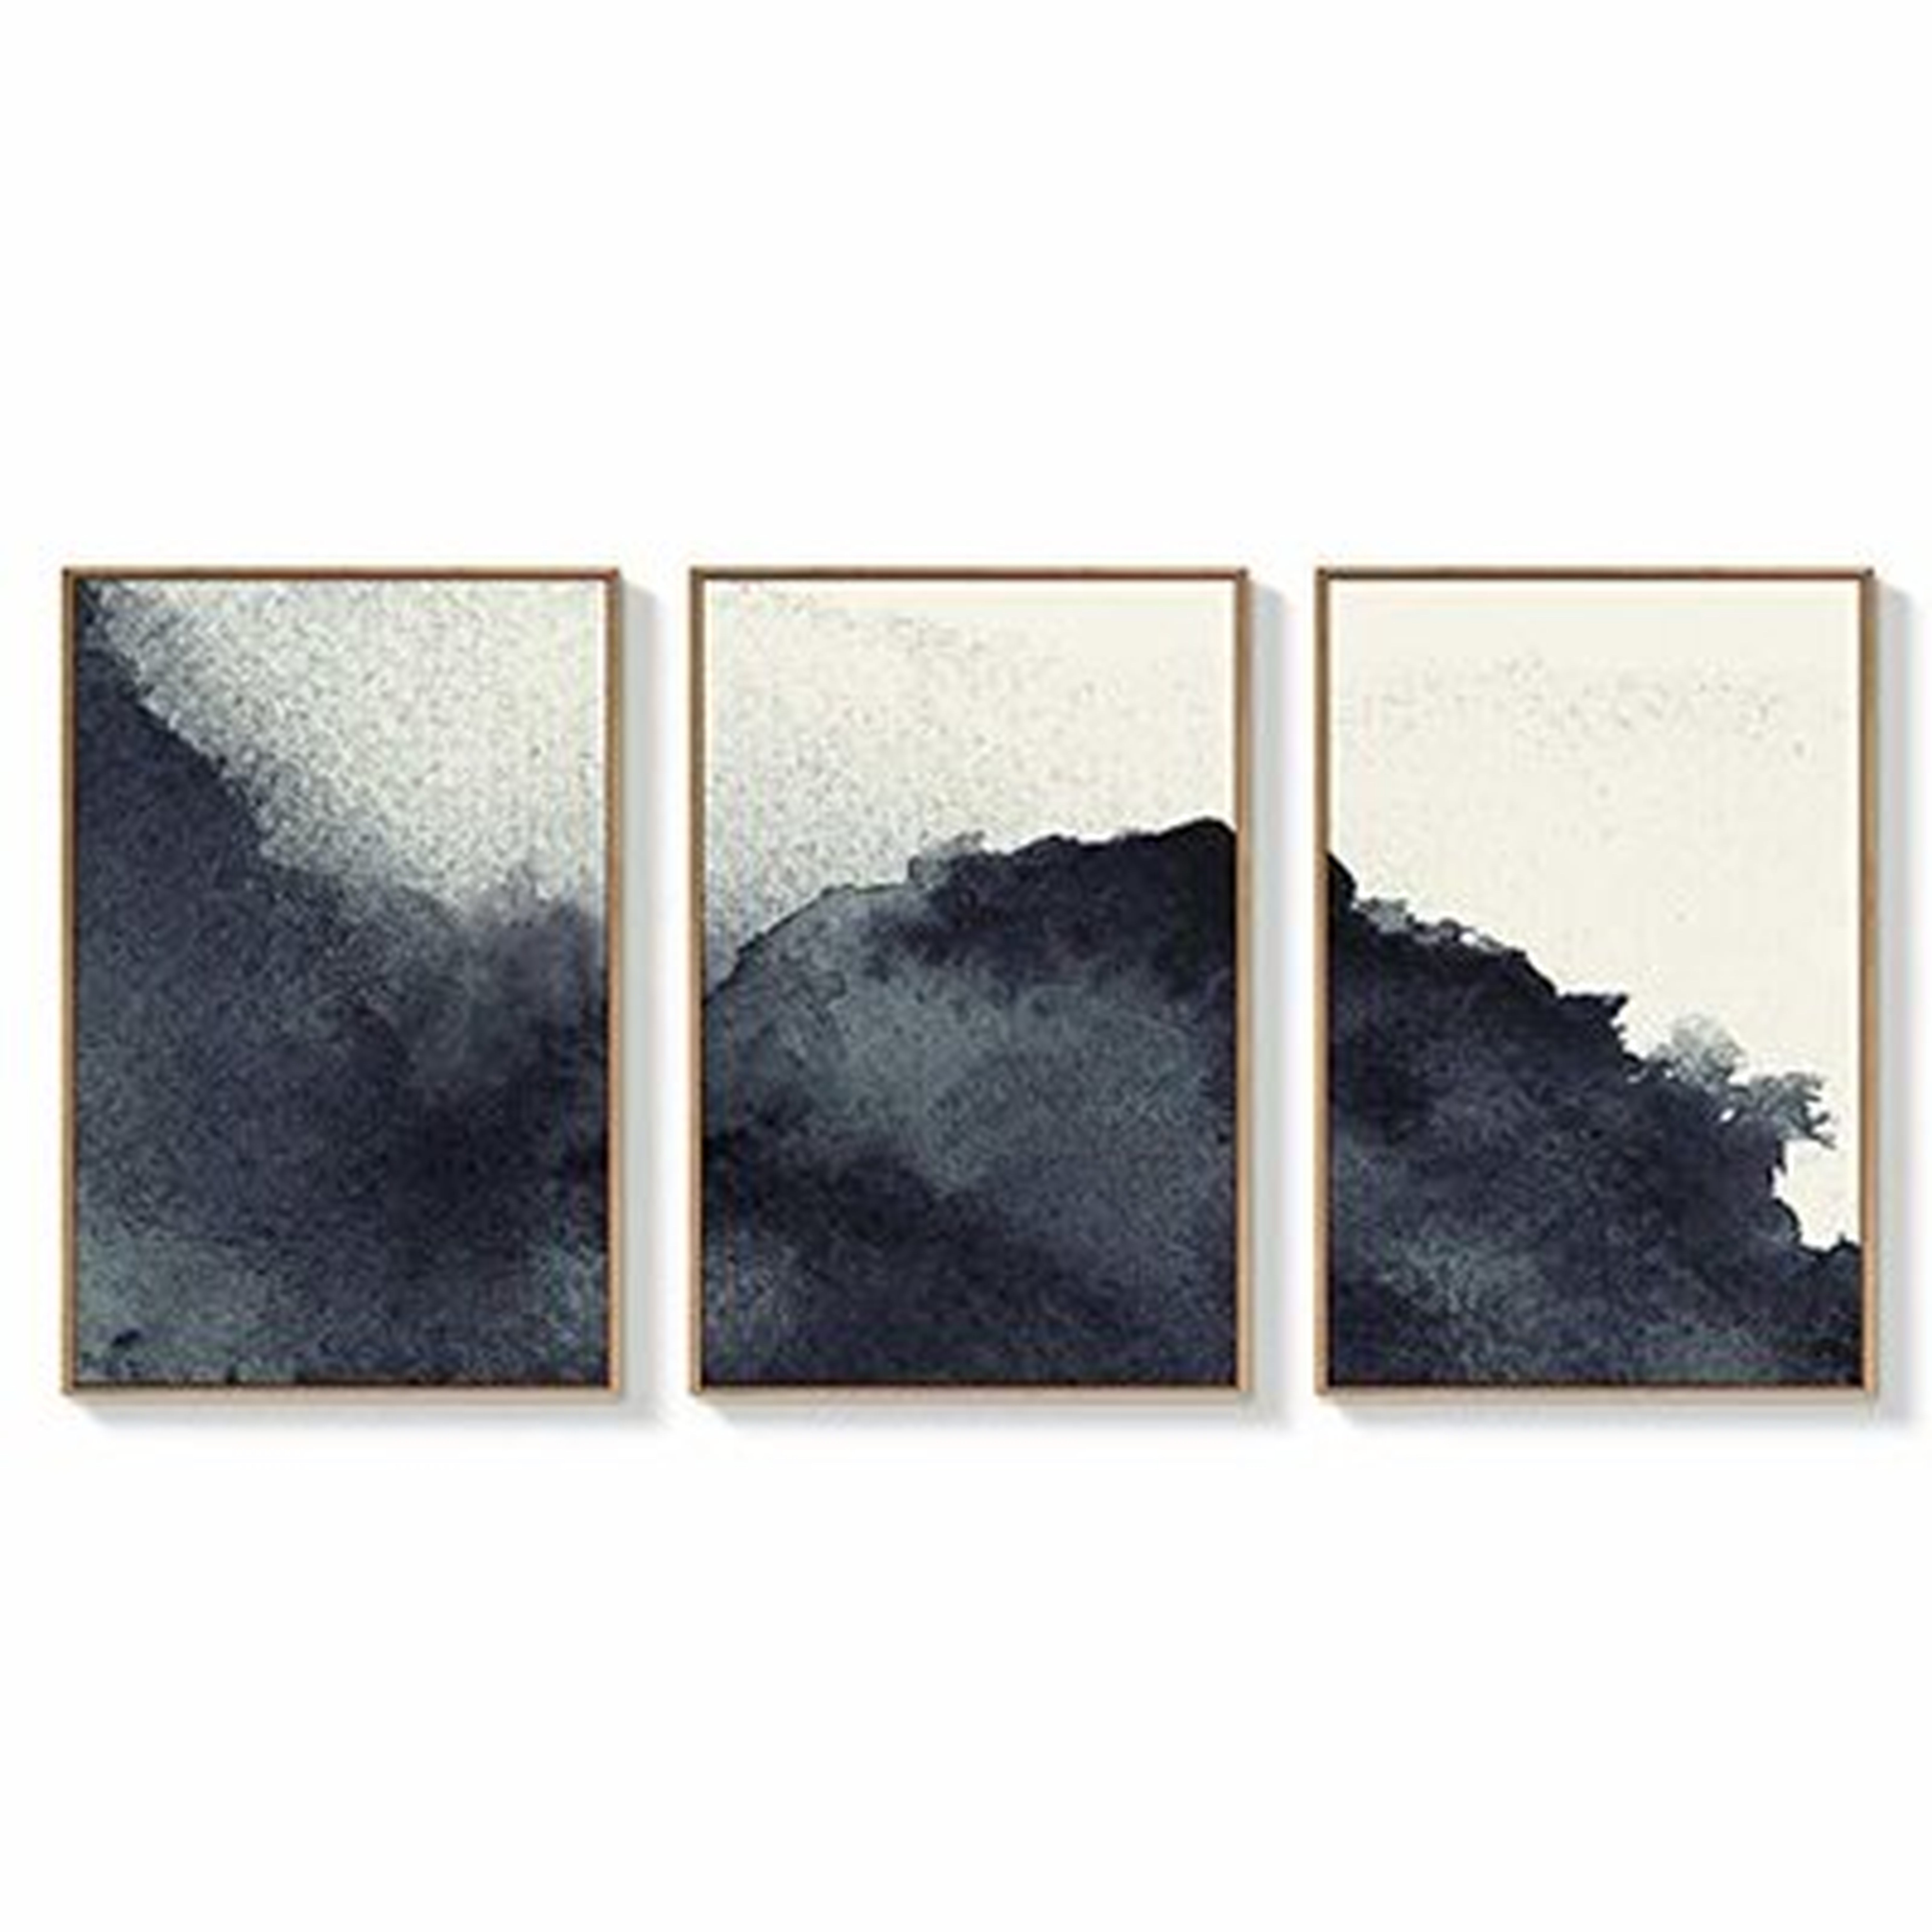 Ivy Bronx Framed Canvas Wall Art For Living Room, Bedroom Abstract Zen Canvas Prints For Home Decoration Ready To Hanging - 24"X36"X3 Panels - Wayfair